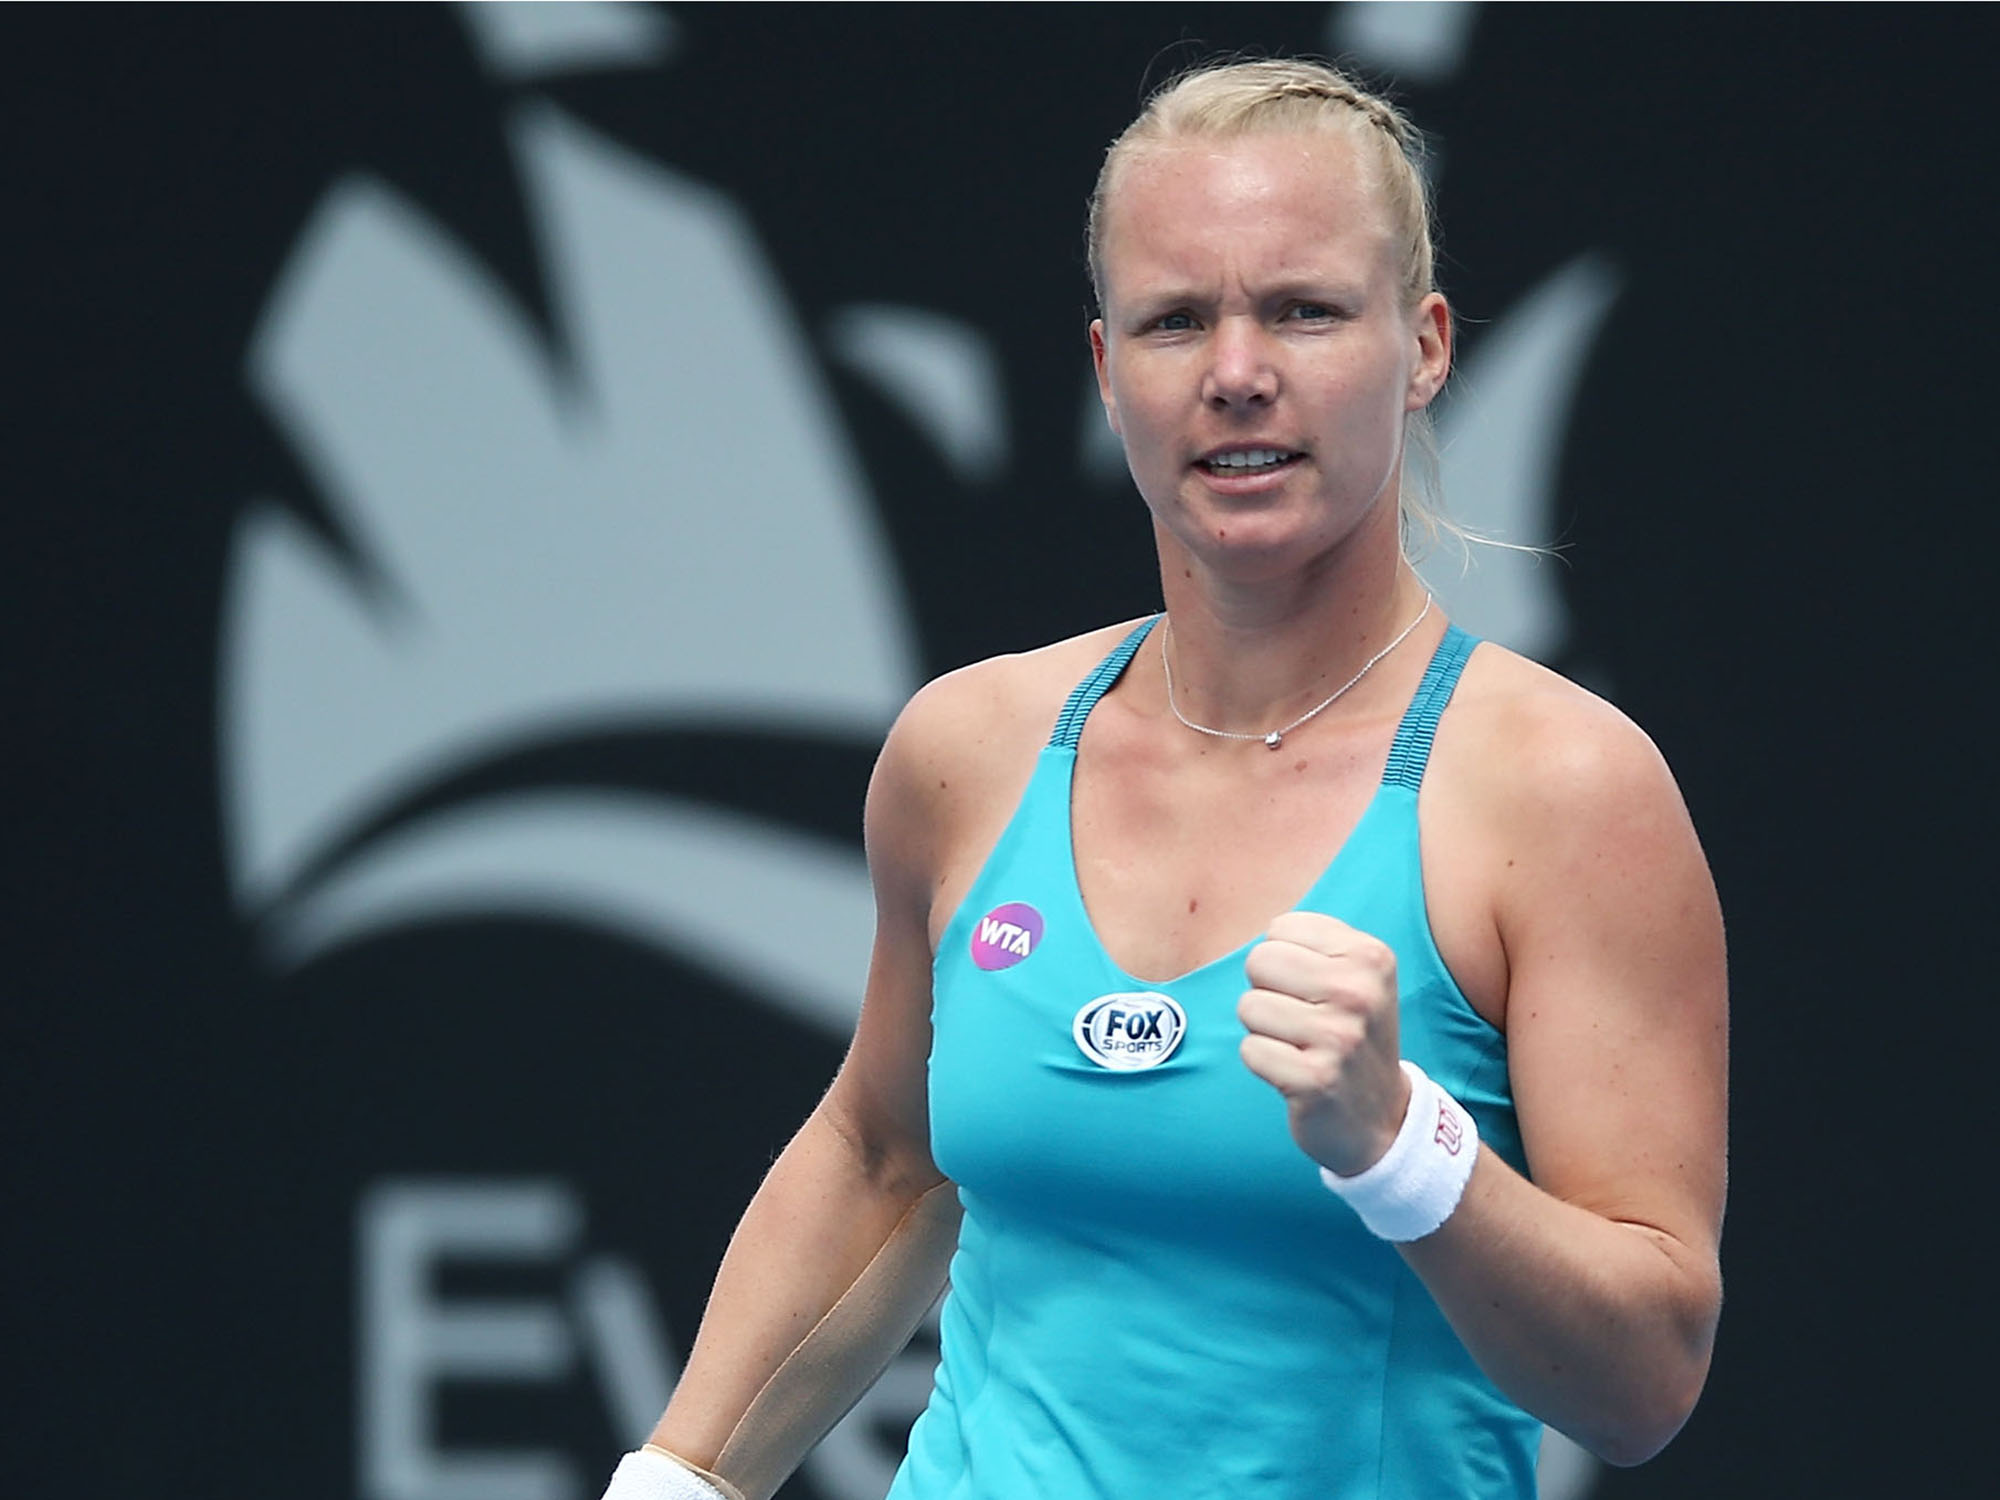 IN FORM: Top seed Kiki Bertens showed her class in a second round win over Galina Voskoboeva; Getty Images